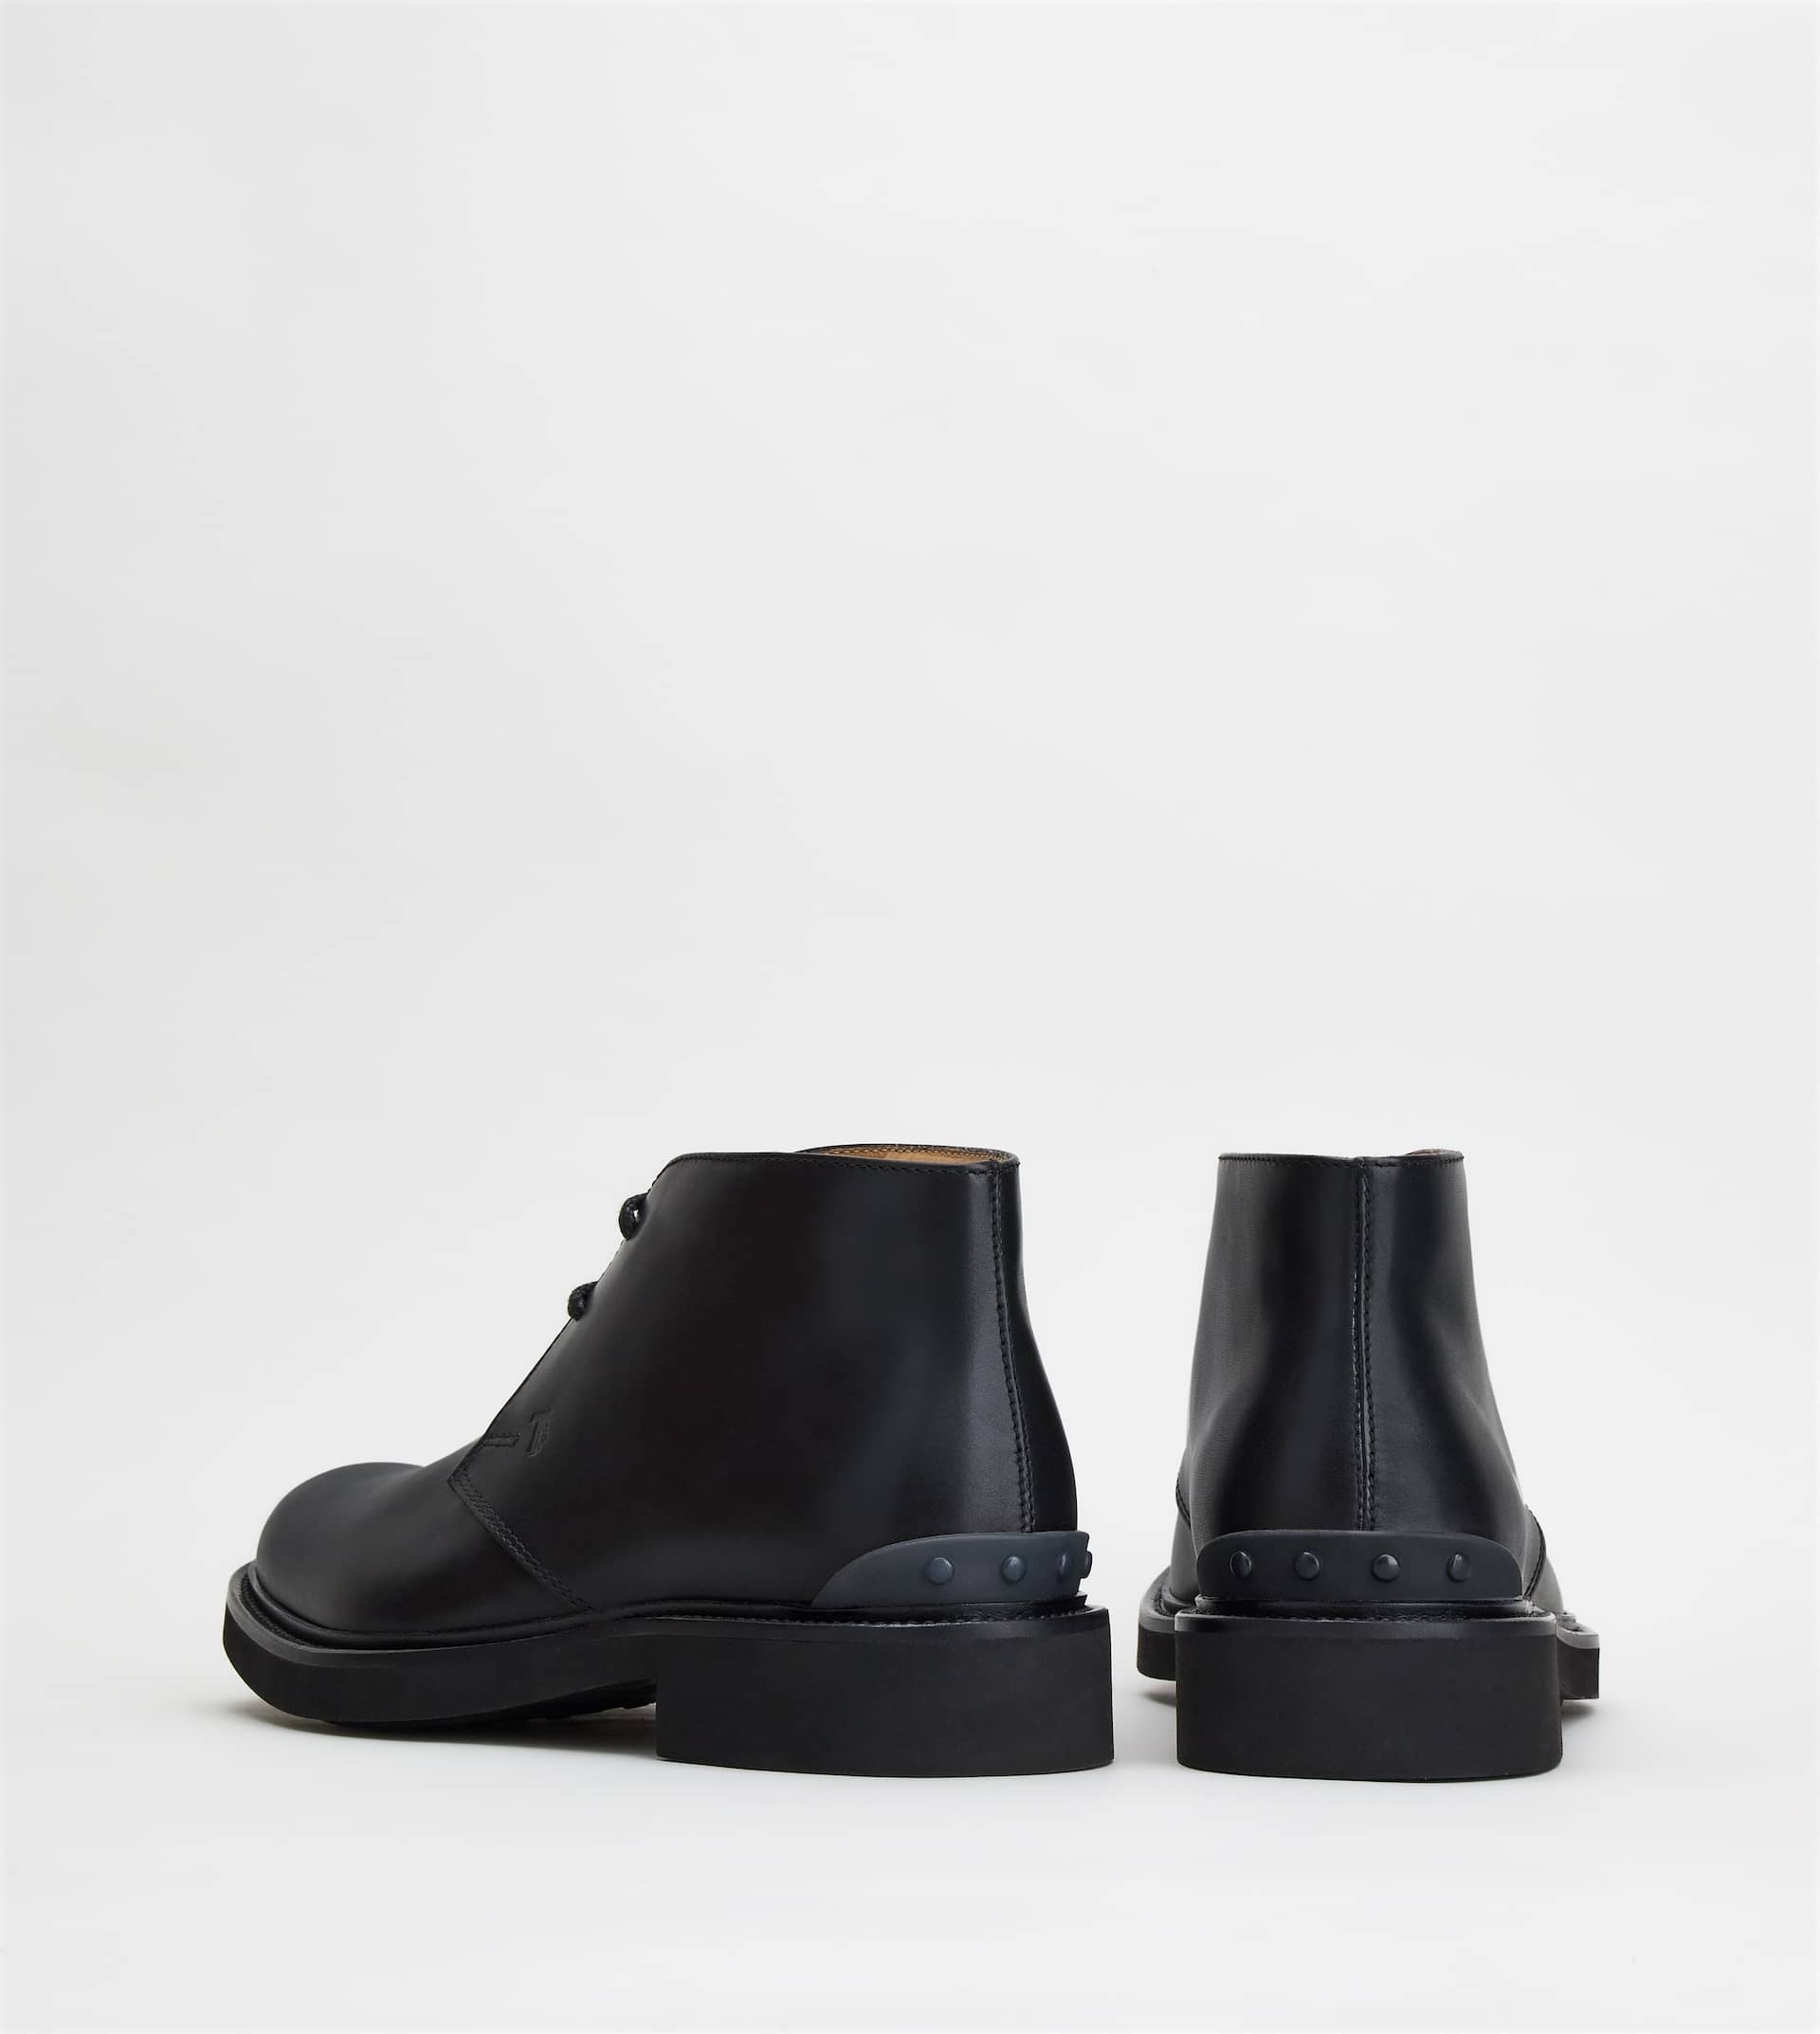 DESERT BOOTS IN LEATHER - BLACK - 3